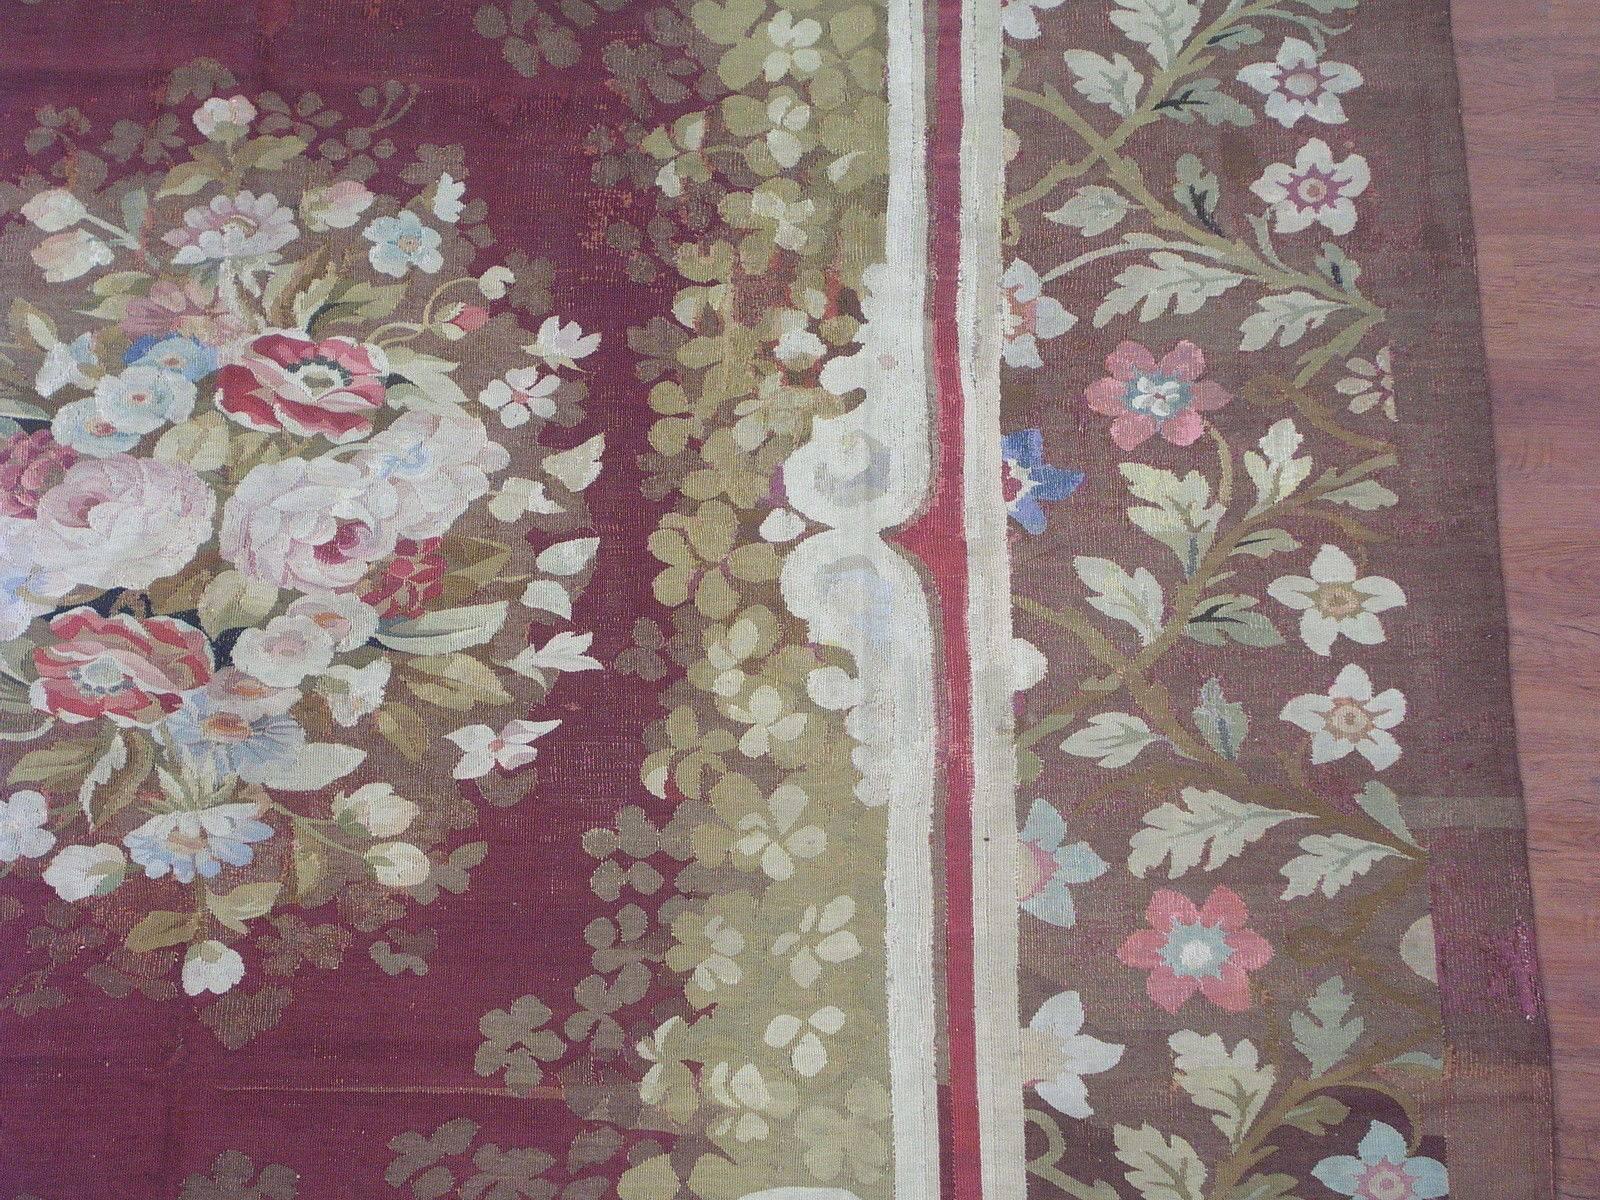 Hand-Woven Antique French Aubusson Rug with Floral Design, circa 1880 For Sale